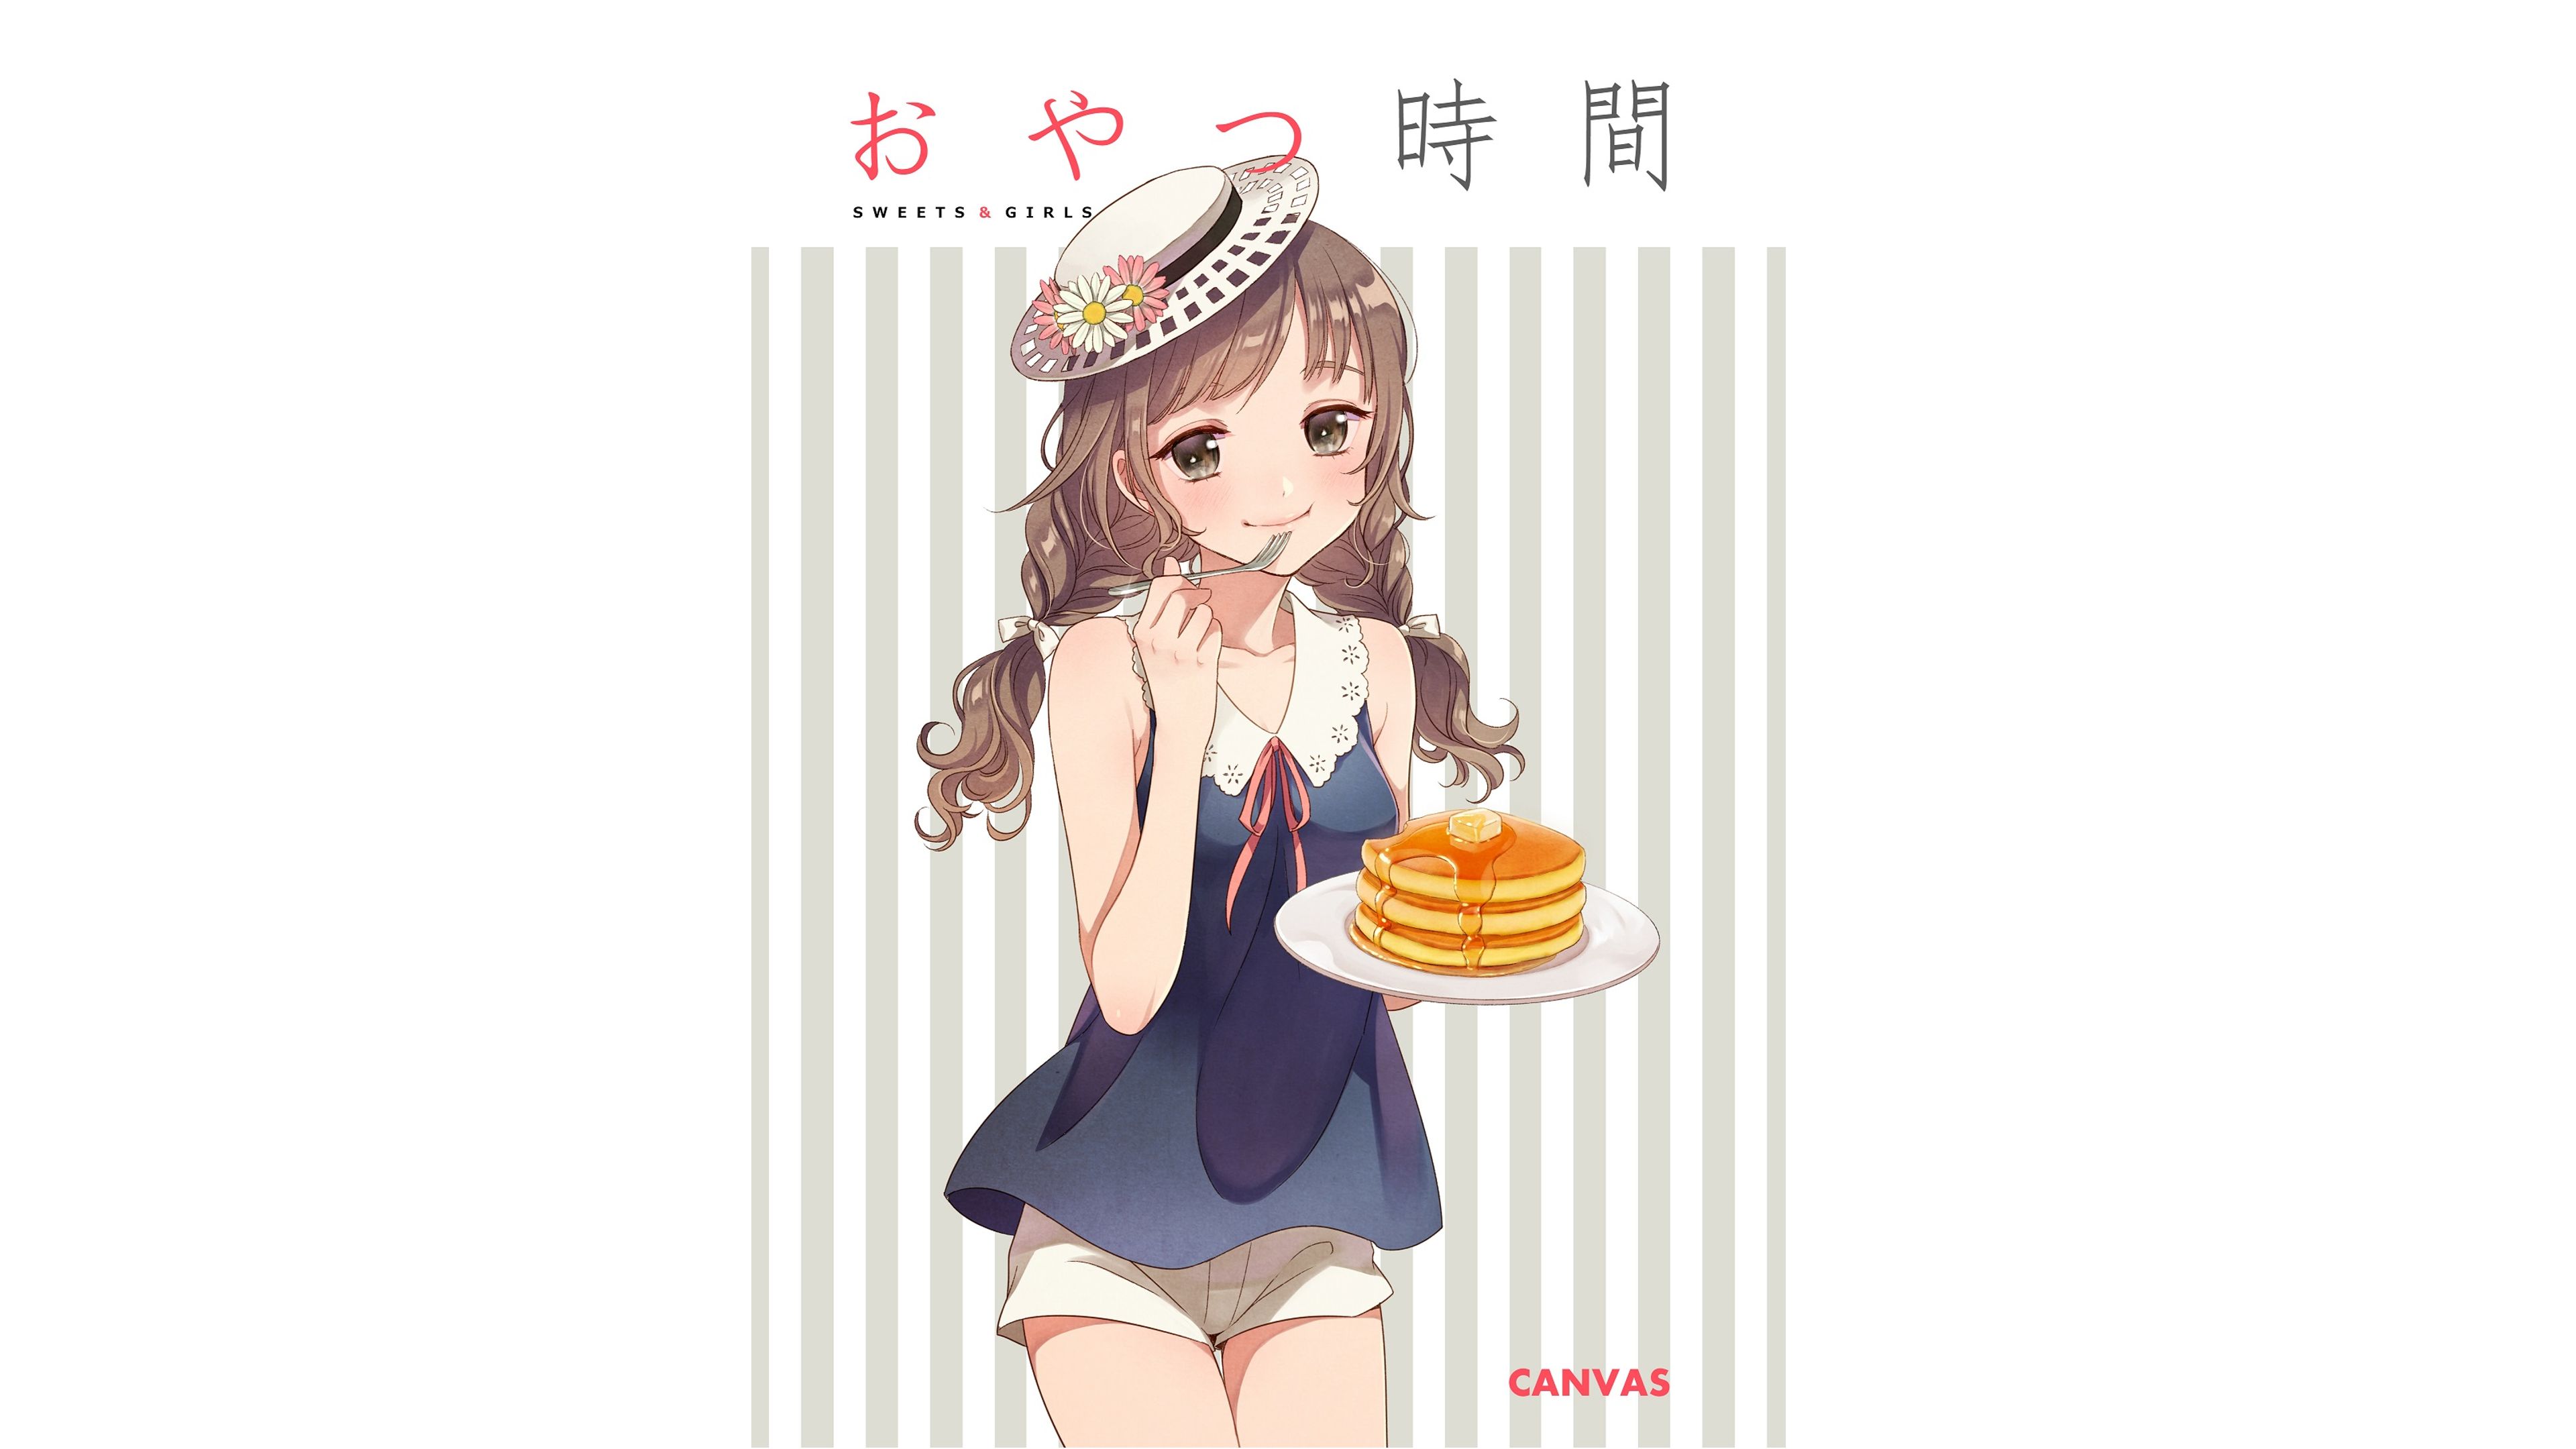 Anime girl with Pancakes on her head